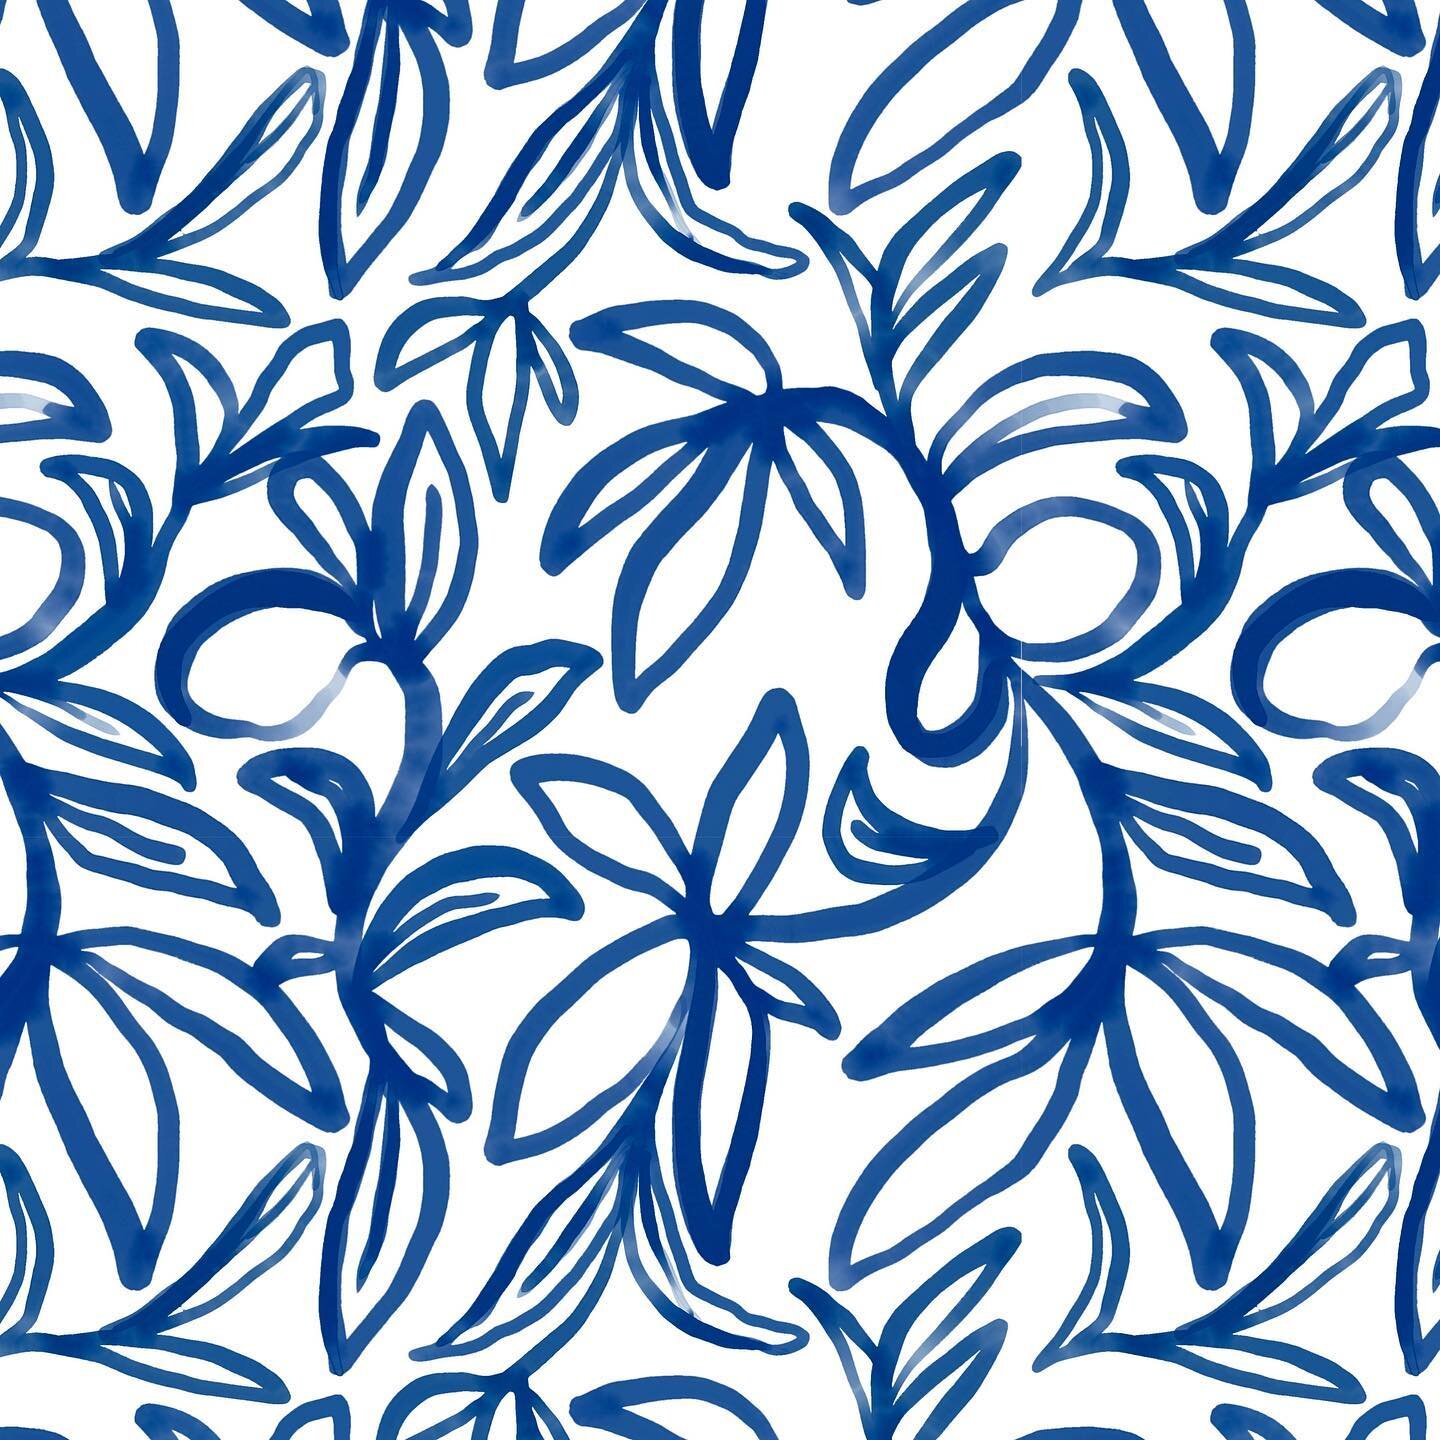 I have always loved the blue and white surface designs. Something about it is so refreshing to me. So here is a blue floral pattern I recently did ✨ 

Had to do some mock ups too ☺️ I like to do that for almost everything I create because sometimes I